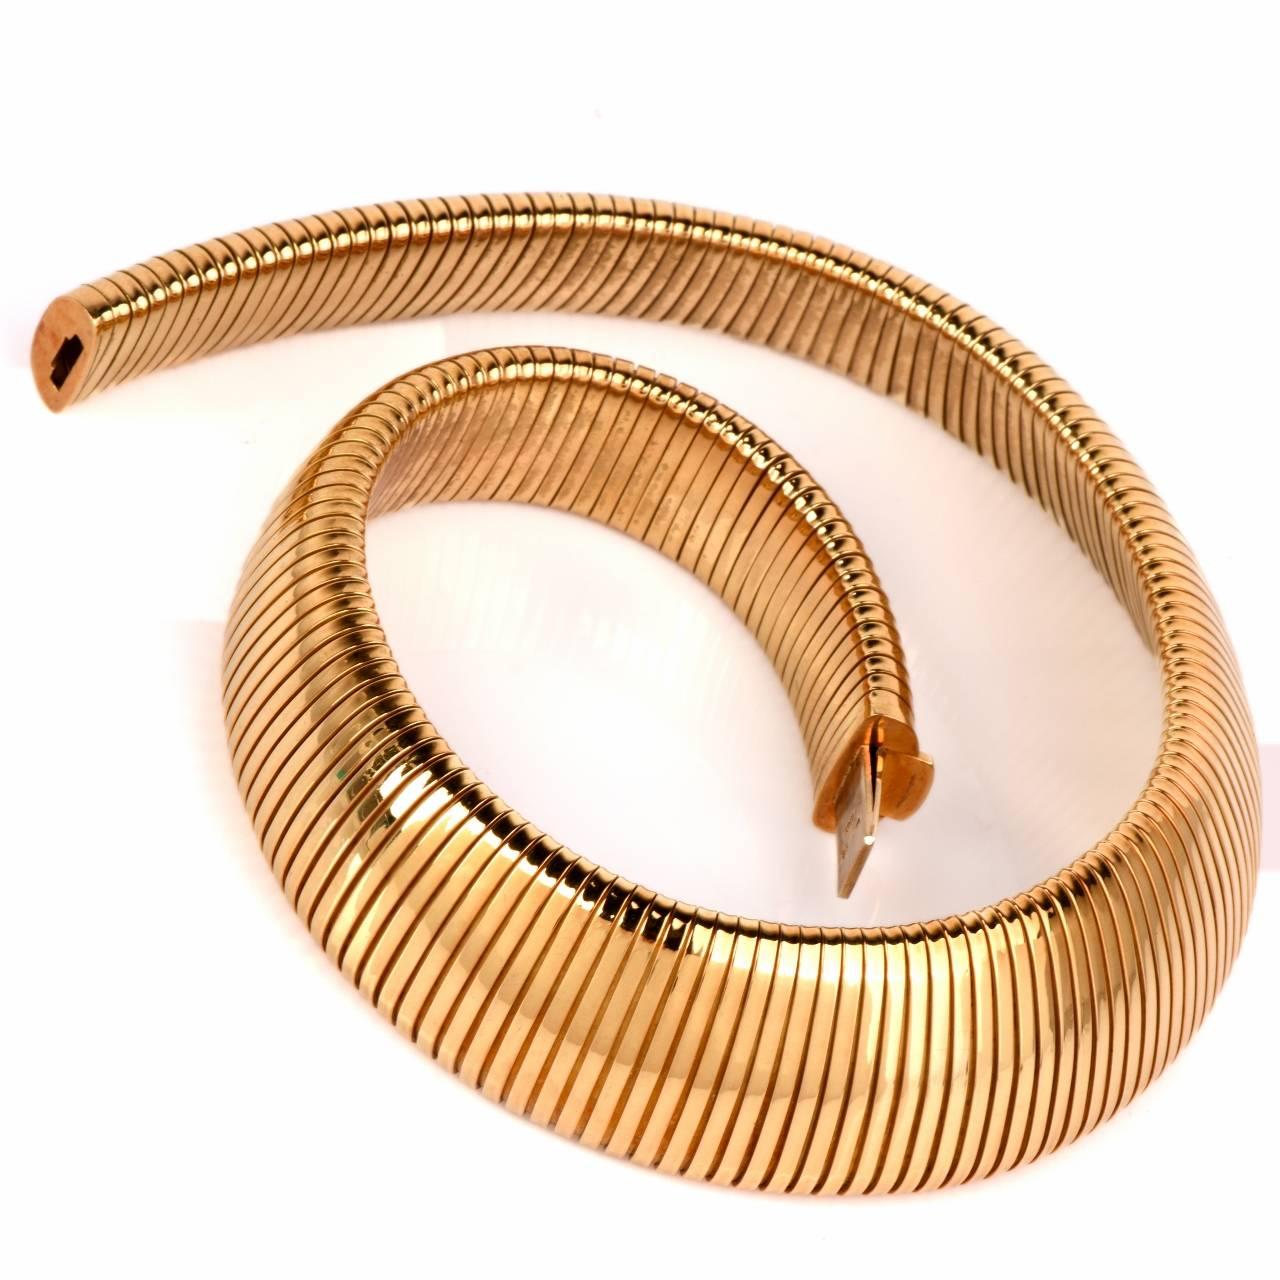 This elegant  Italian estate  snake choker necklace is crafted in solid 18K yellow gold. This flexible necklace exposes a wide design with an insert clasp, making it appear seamless when worn. This is the perfect statement piece for any daily